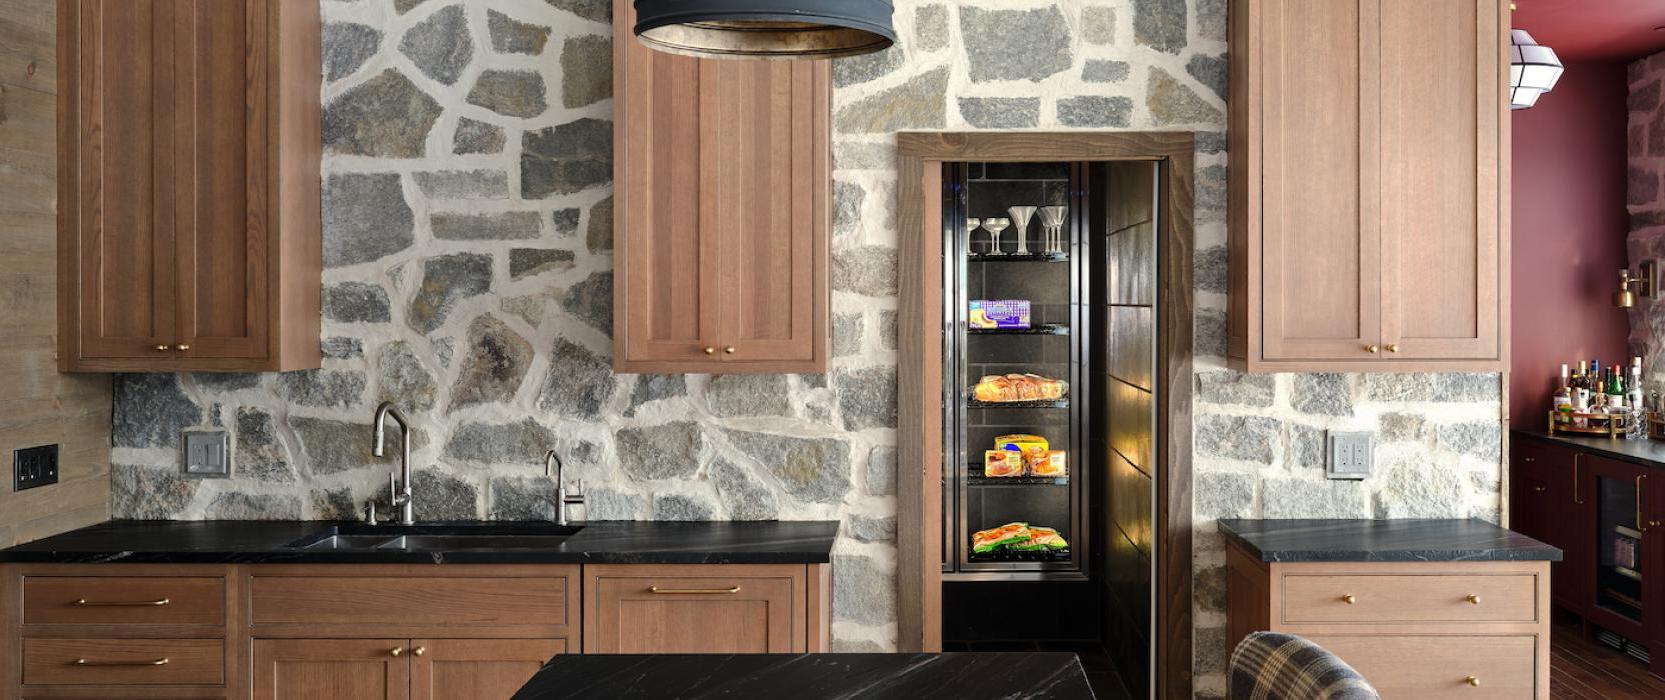 rootcellar concepts, Stowe VT, refrigerated pantry, kitchen design